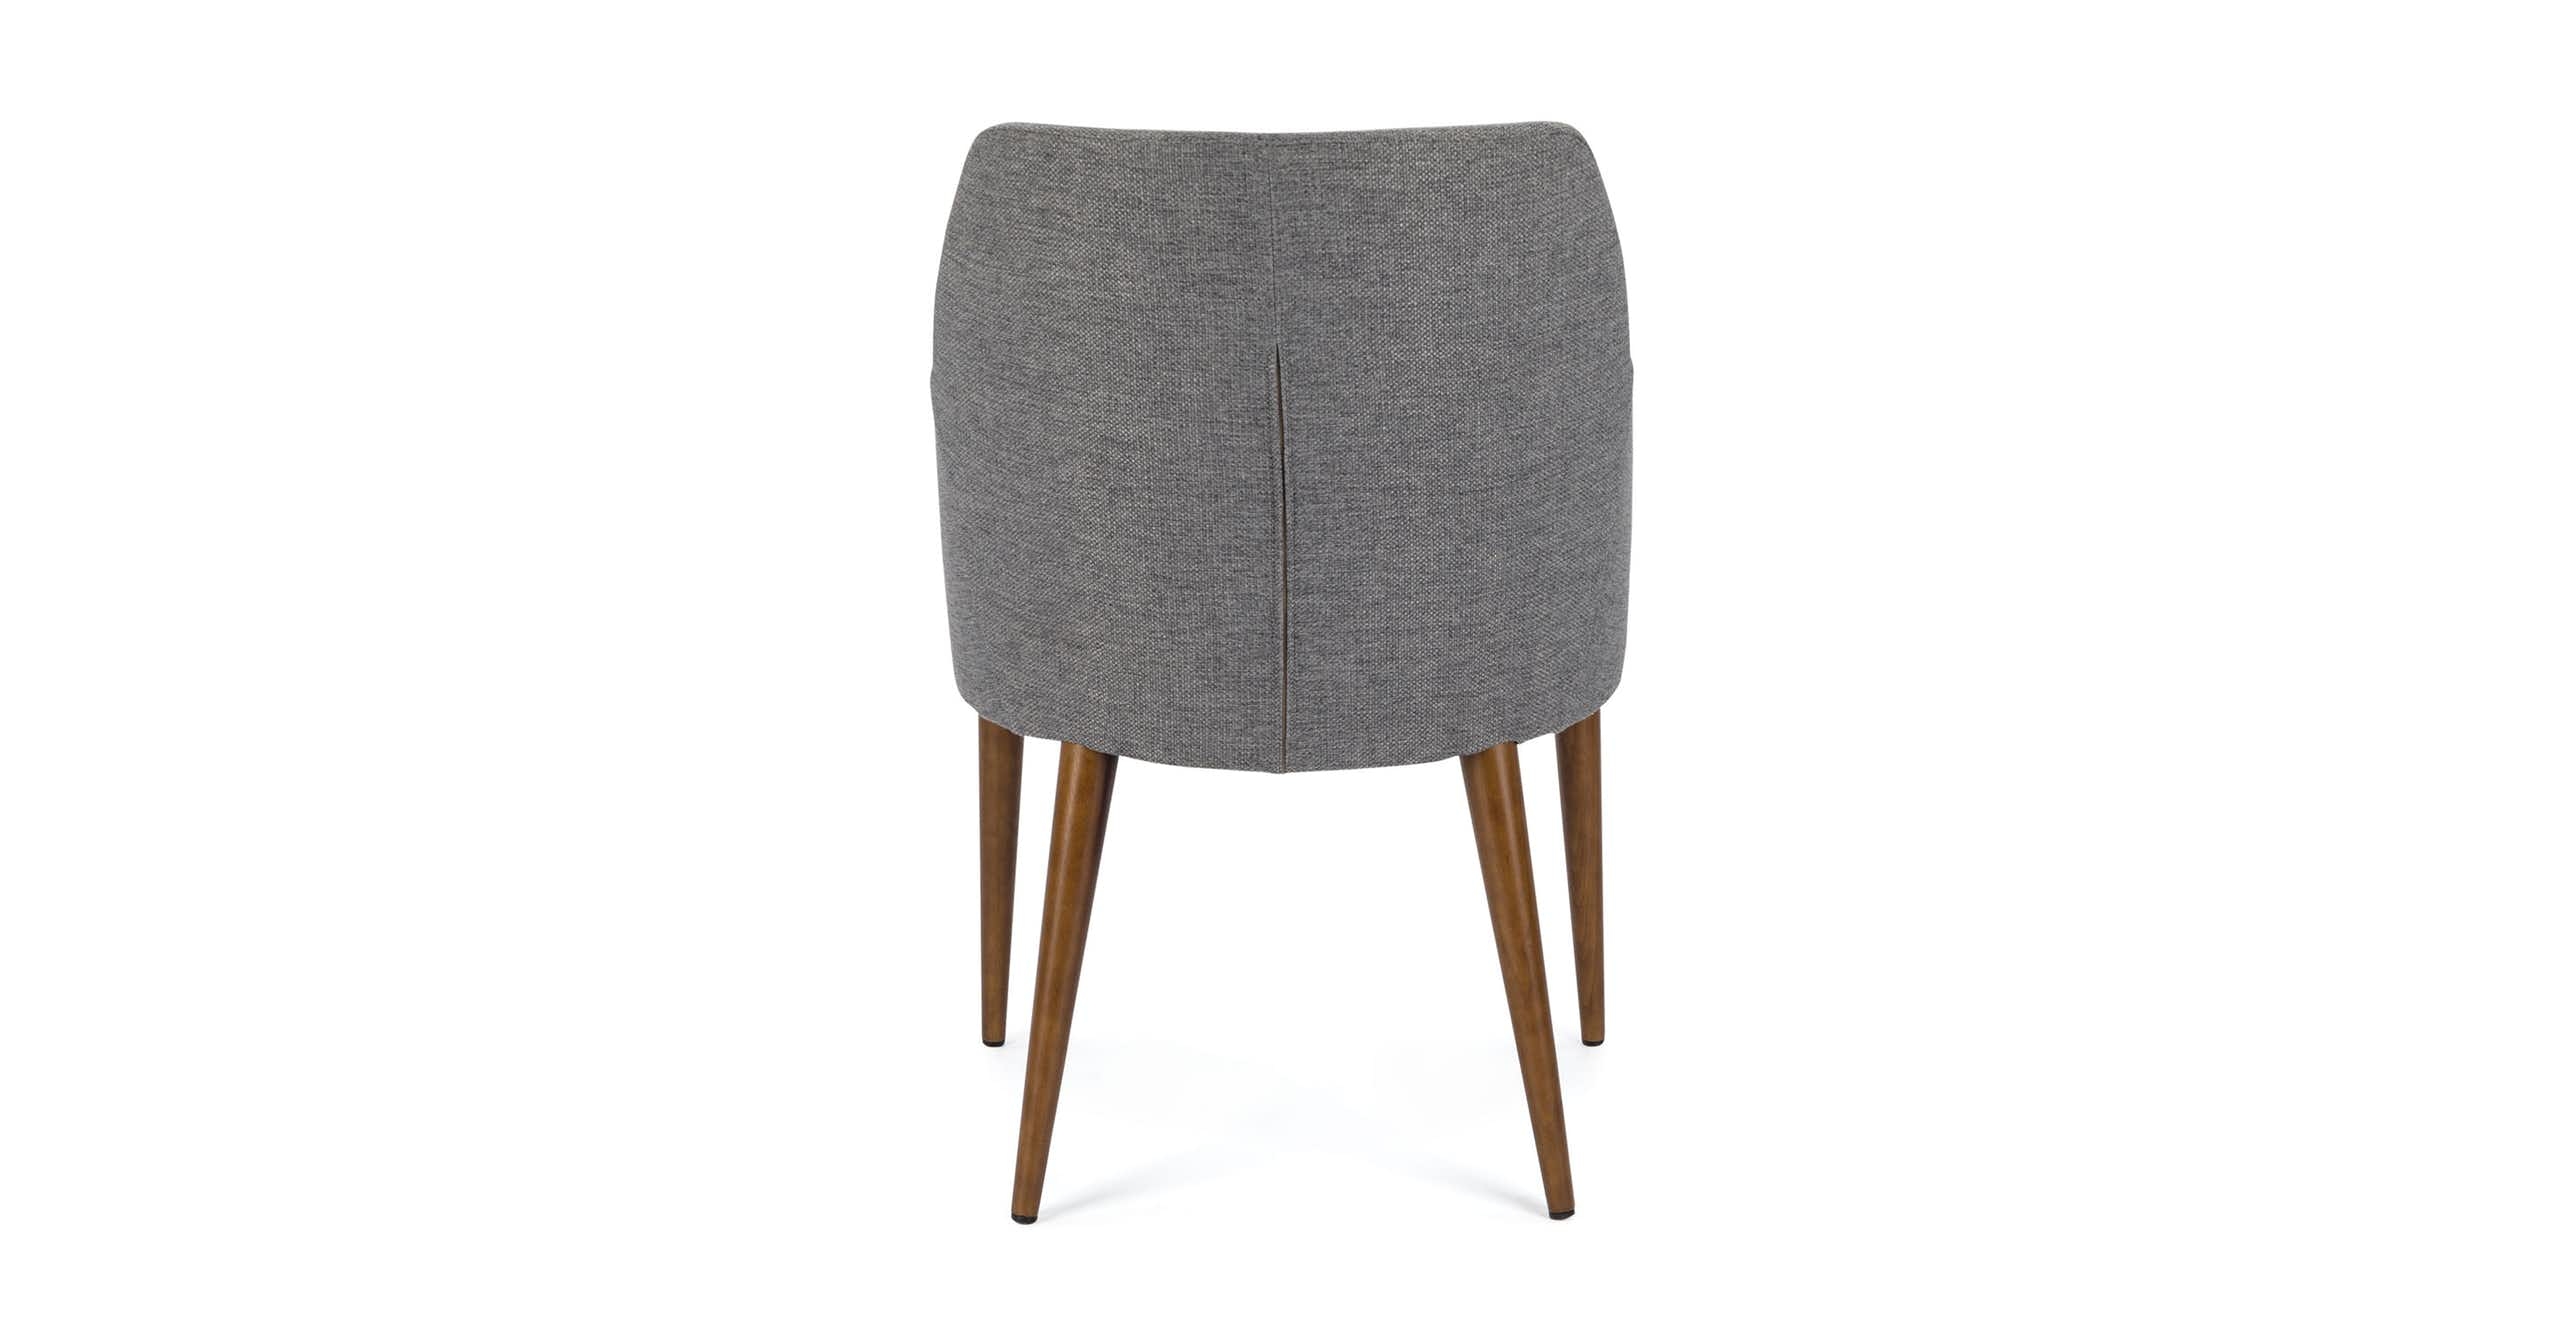 Feast Gravel Gray Dining Chair - Image 2